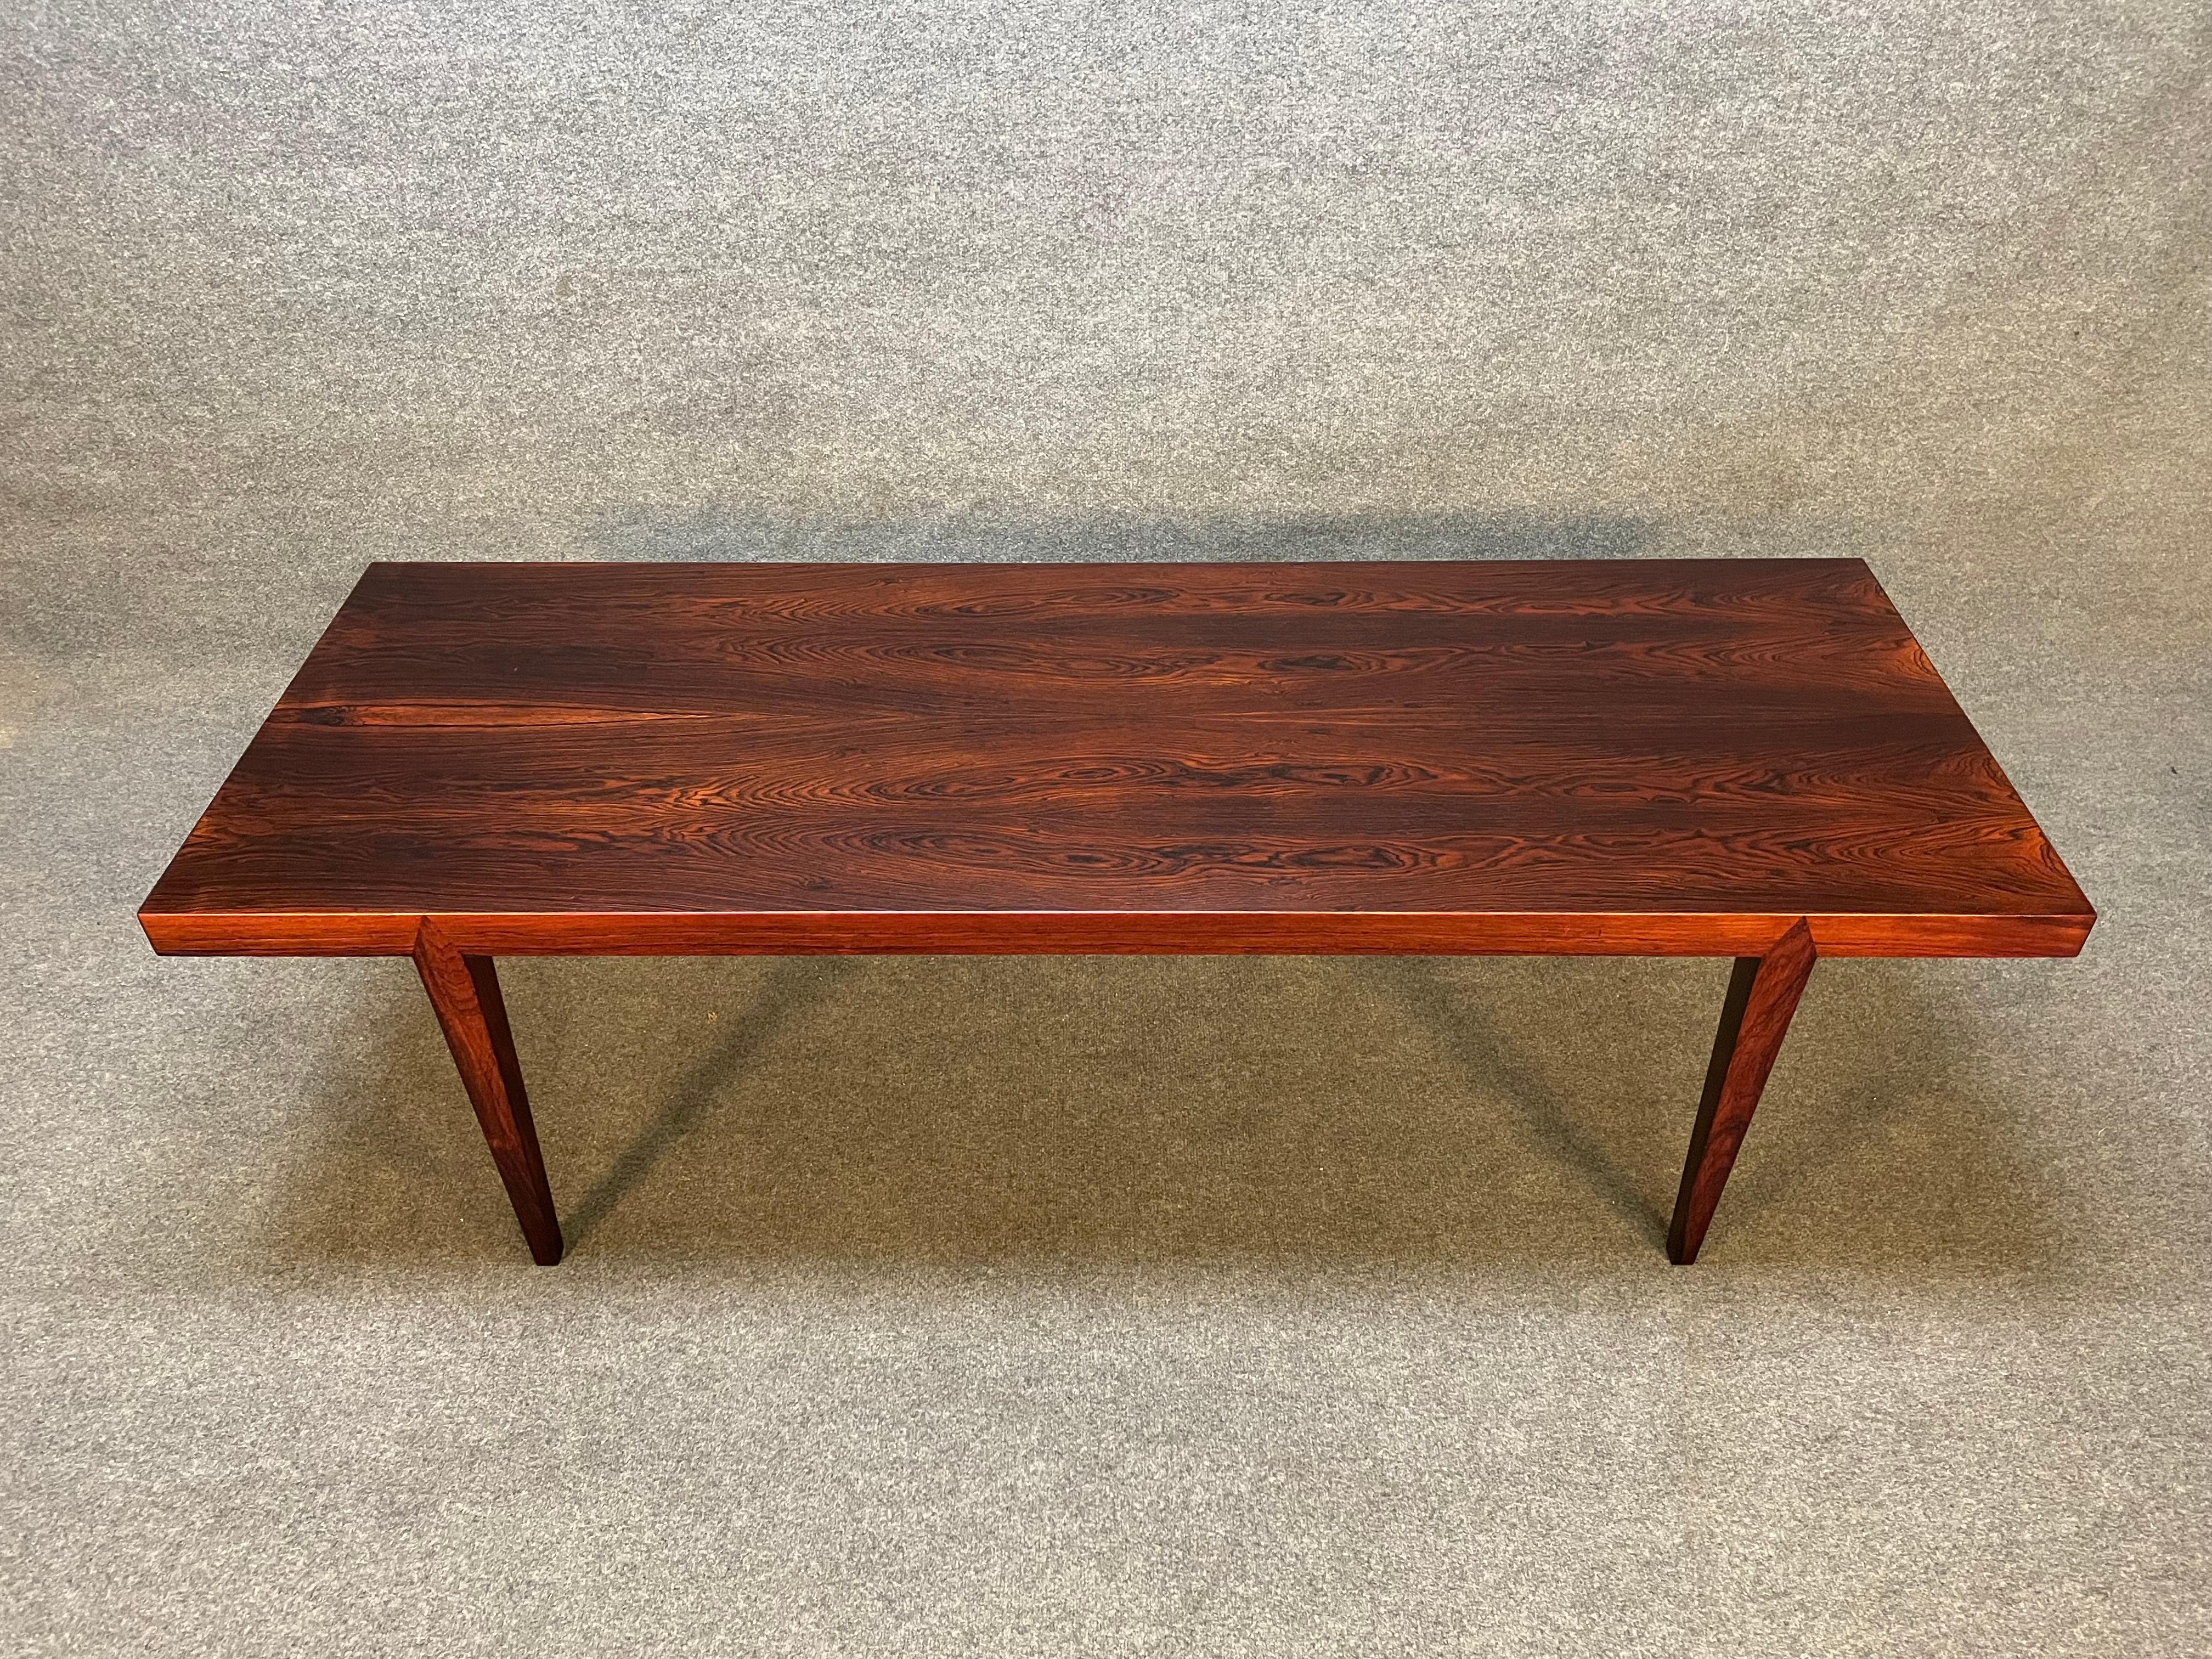 Vintage Danish Mid Century Modern Rosewood Coffee Table by Severin Hansen In Good Condition For Sale In San Marcos, CA